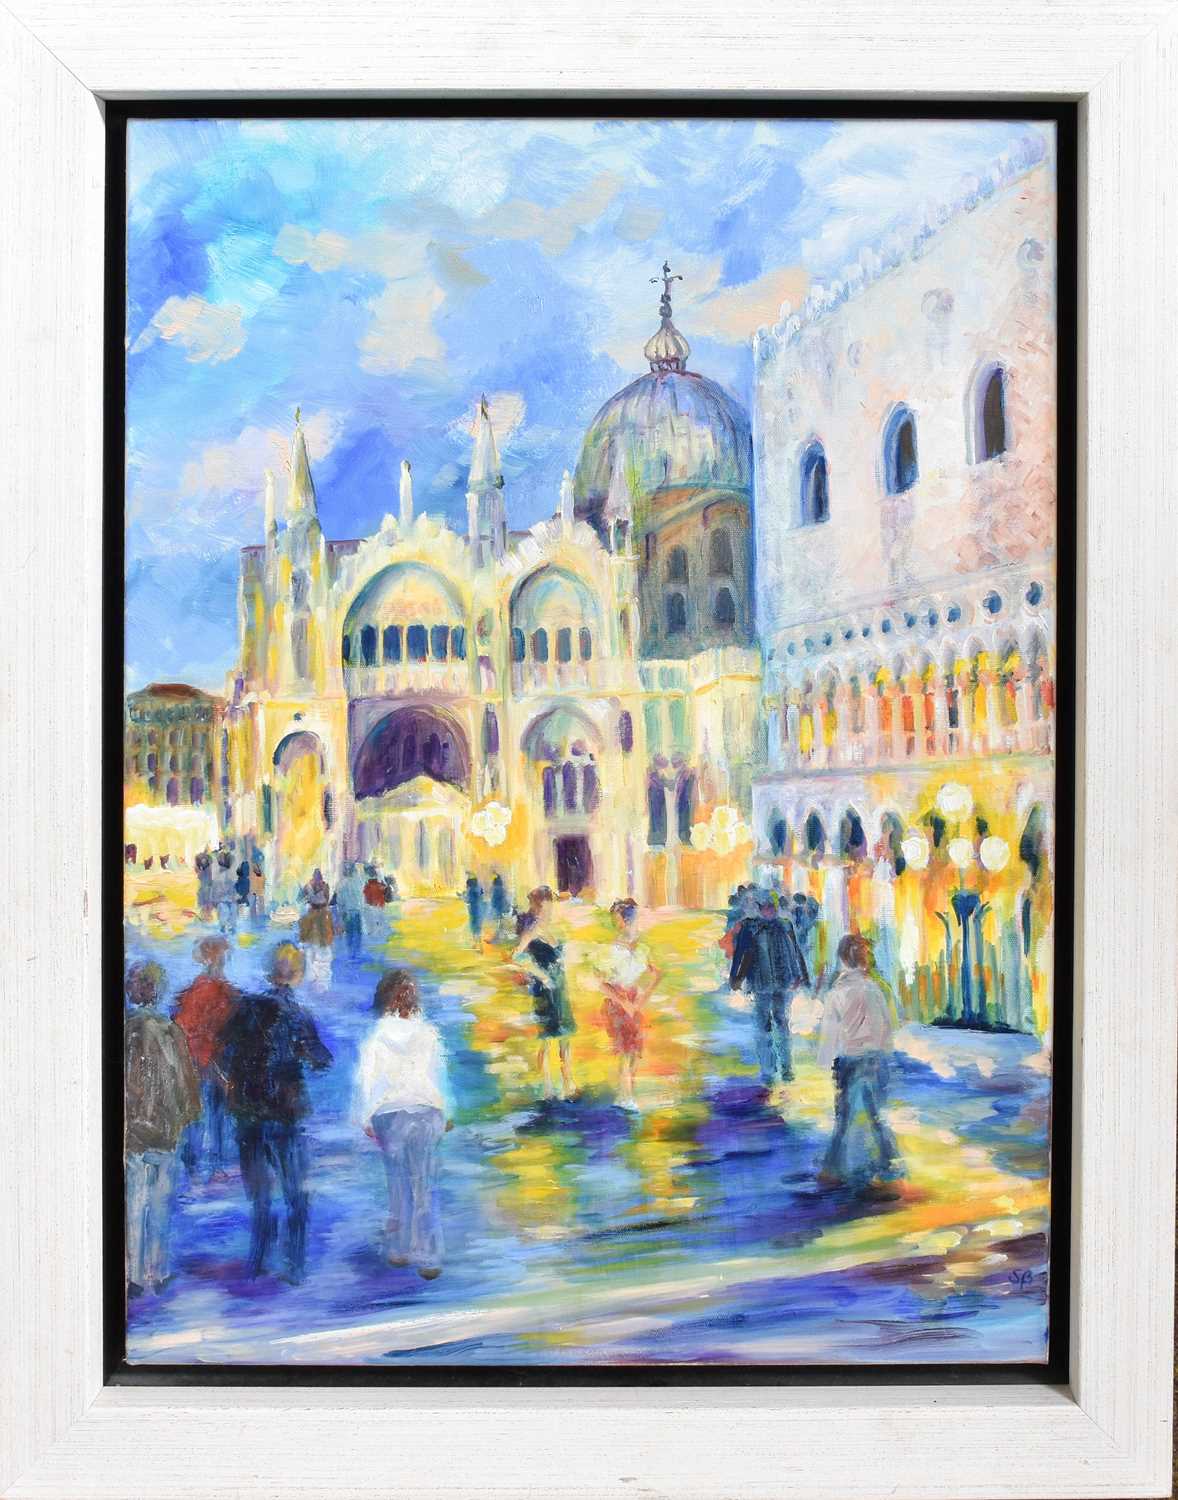 Susan Beazley (20th Century) "St Marks" 2009 Initialled, oil on canvas, 73cm by 54cm - Image 2 of 2